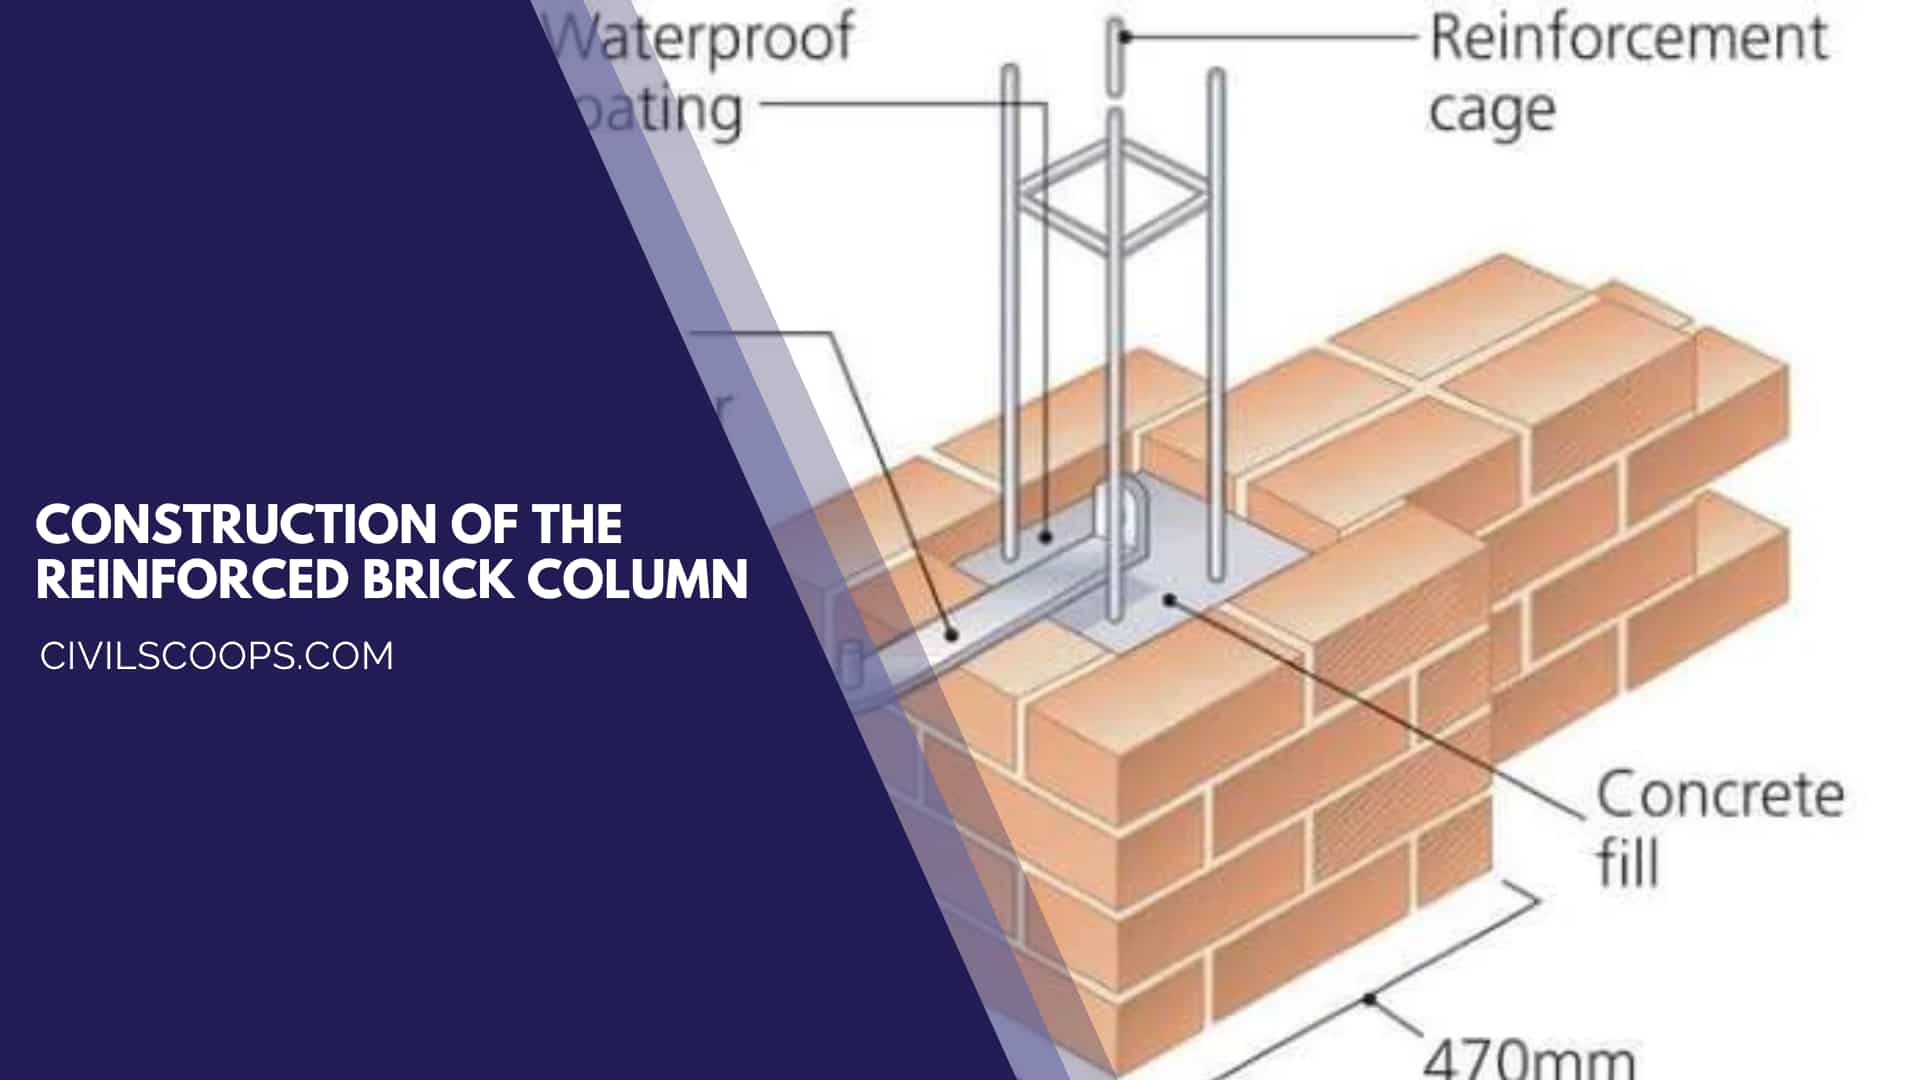 Construction of the Reinforced Brick Column